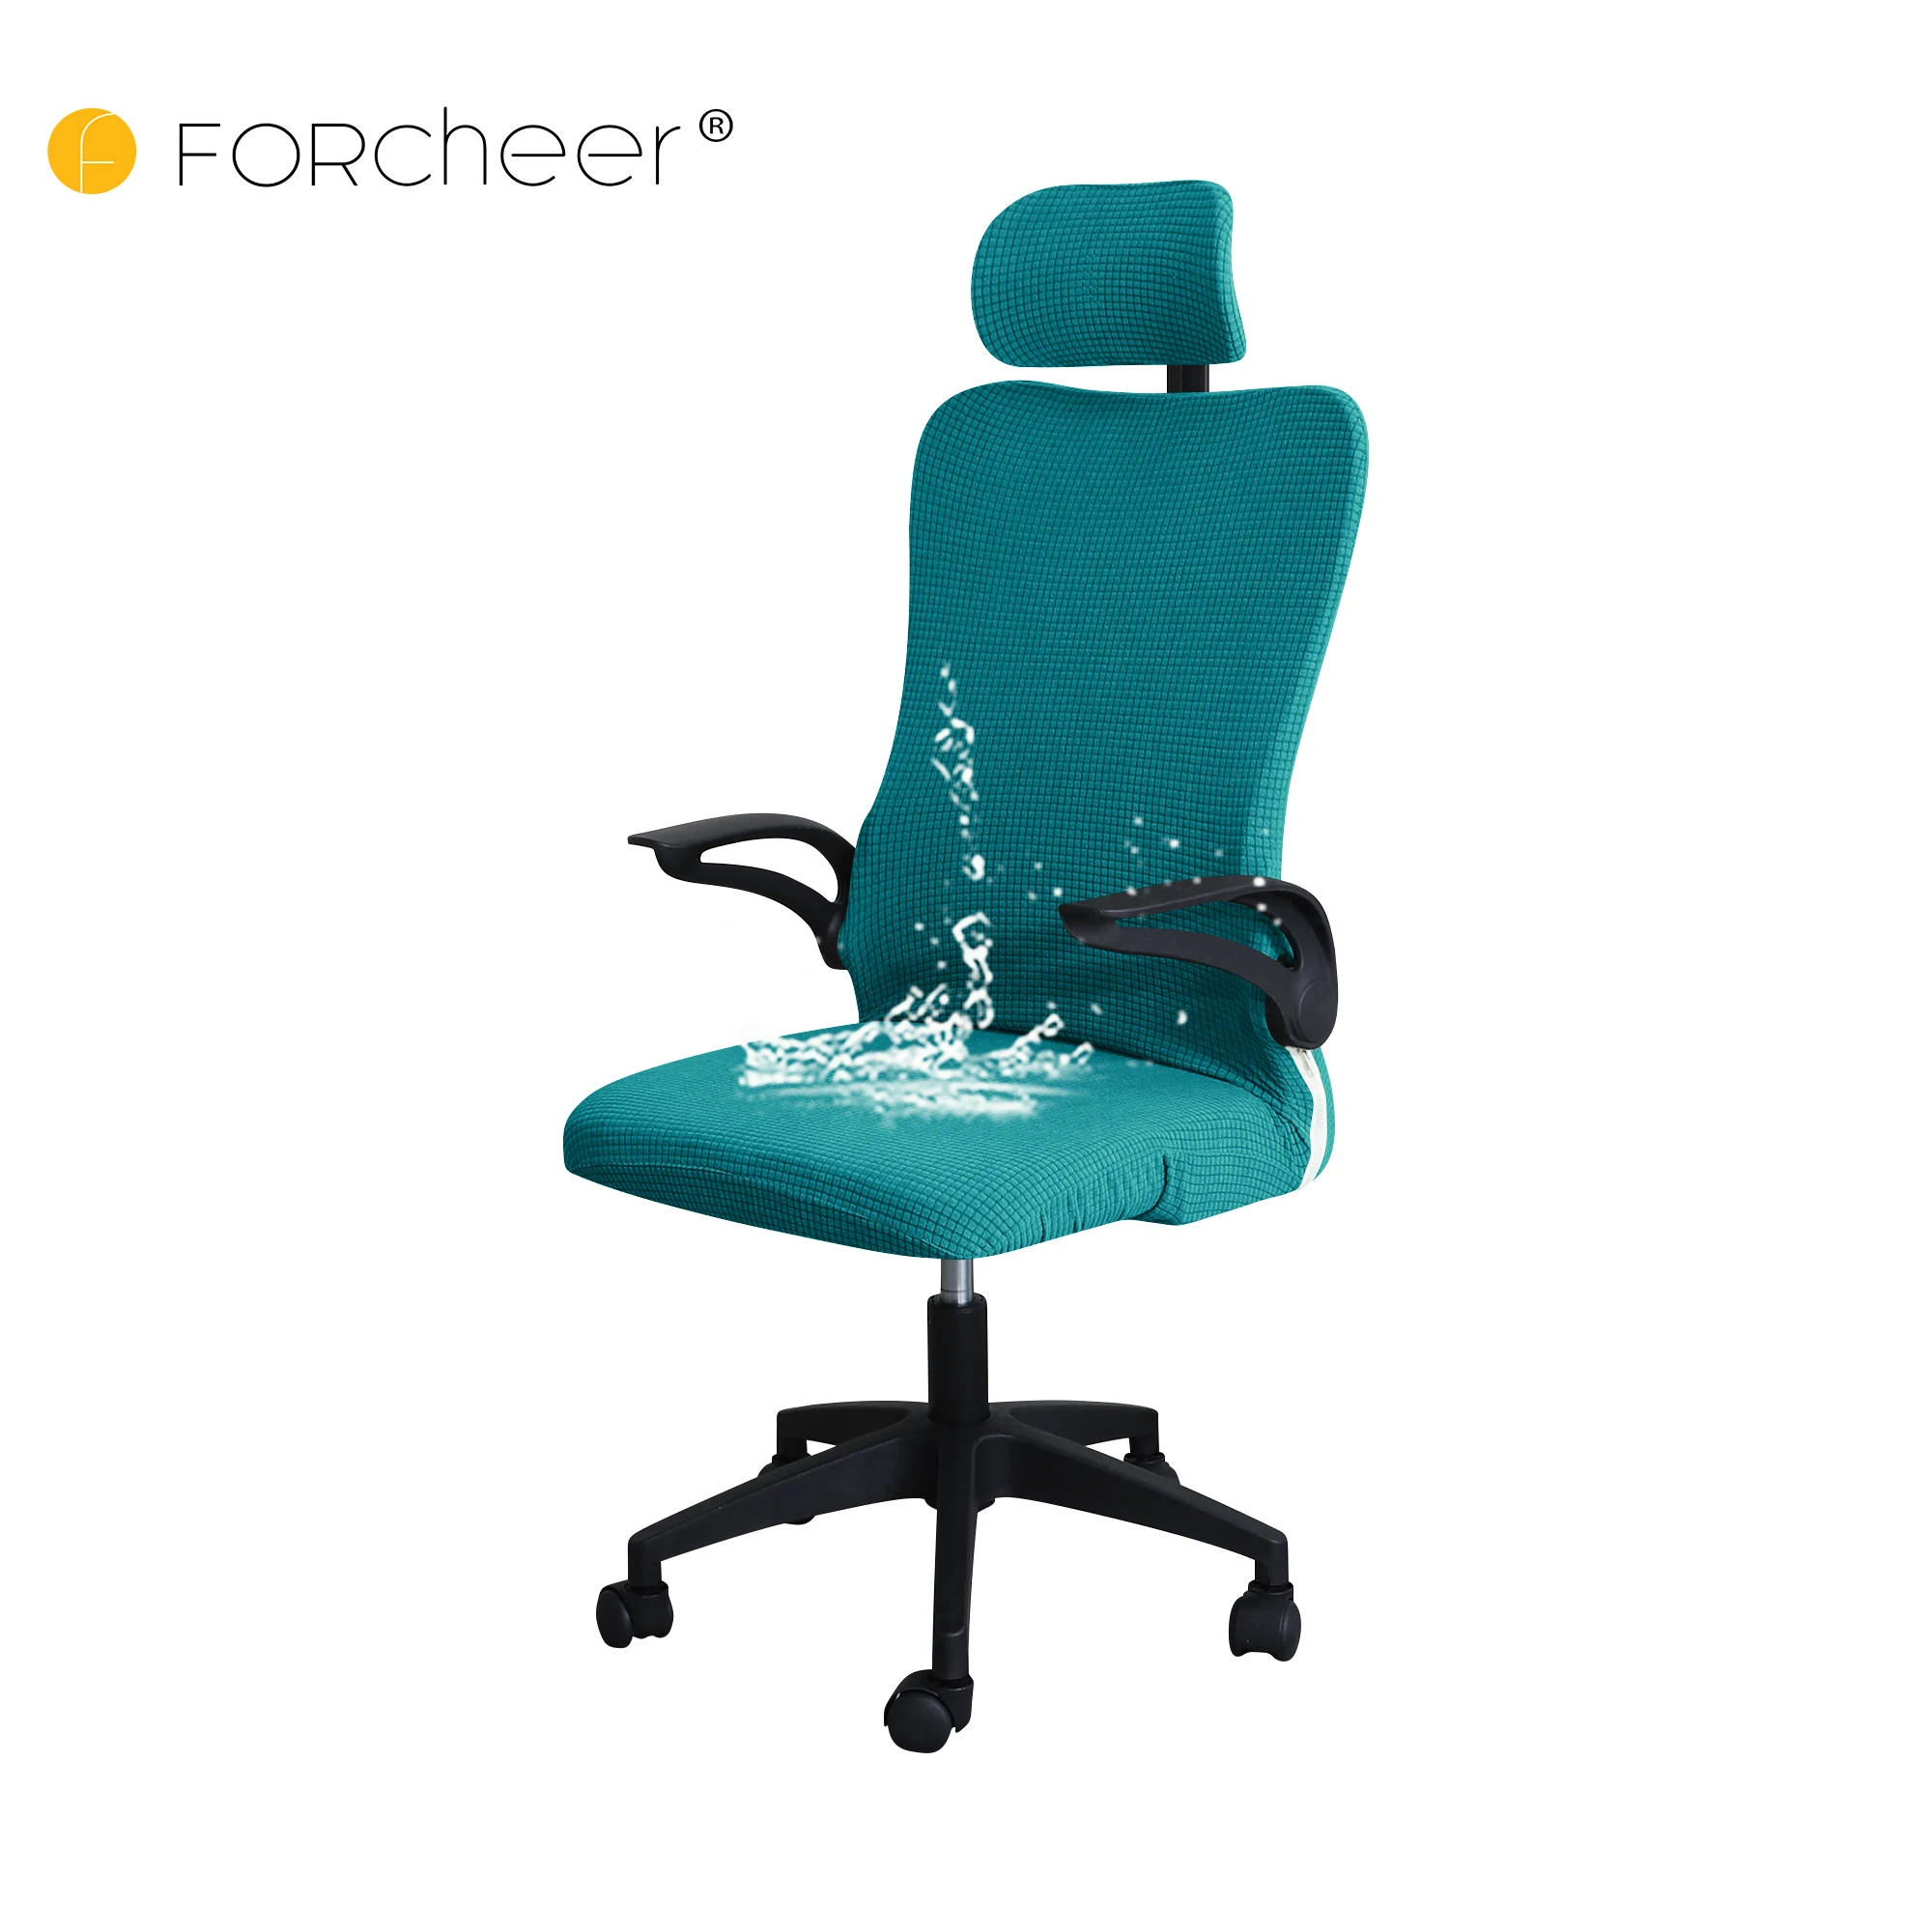 

Ergonomic Office Chair Cover Set with Headrest Cover Water Repellent Managerial Chair Cover for Office Executive Chairs